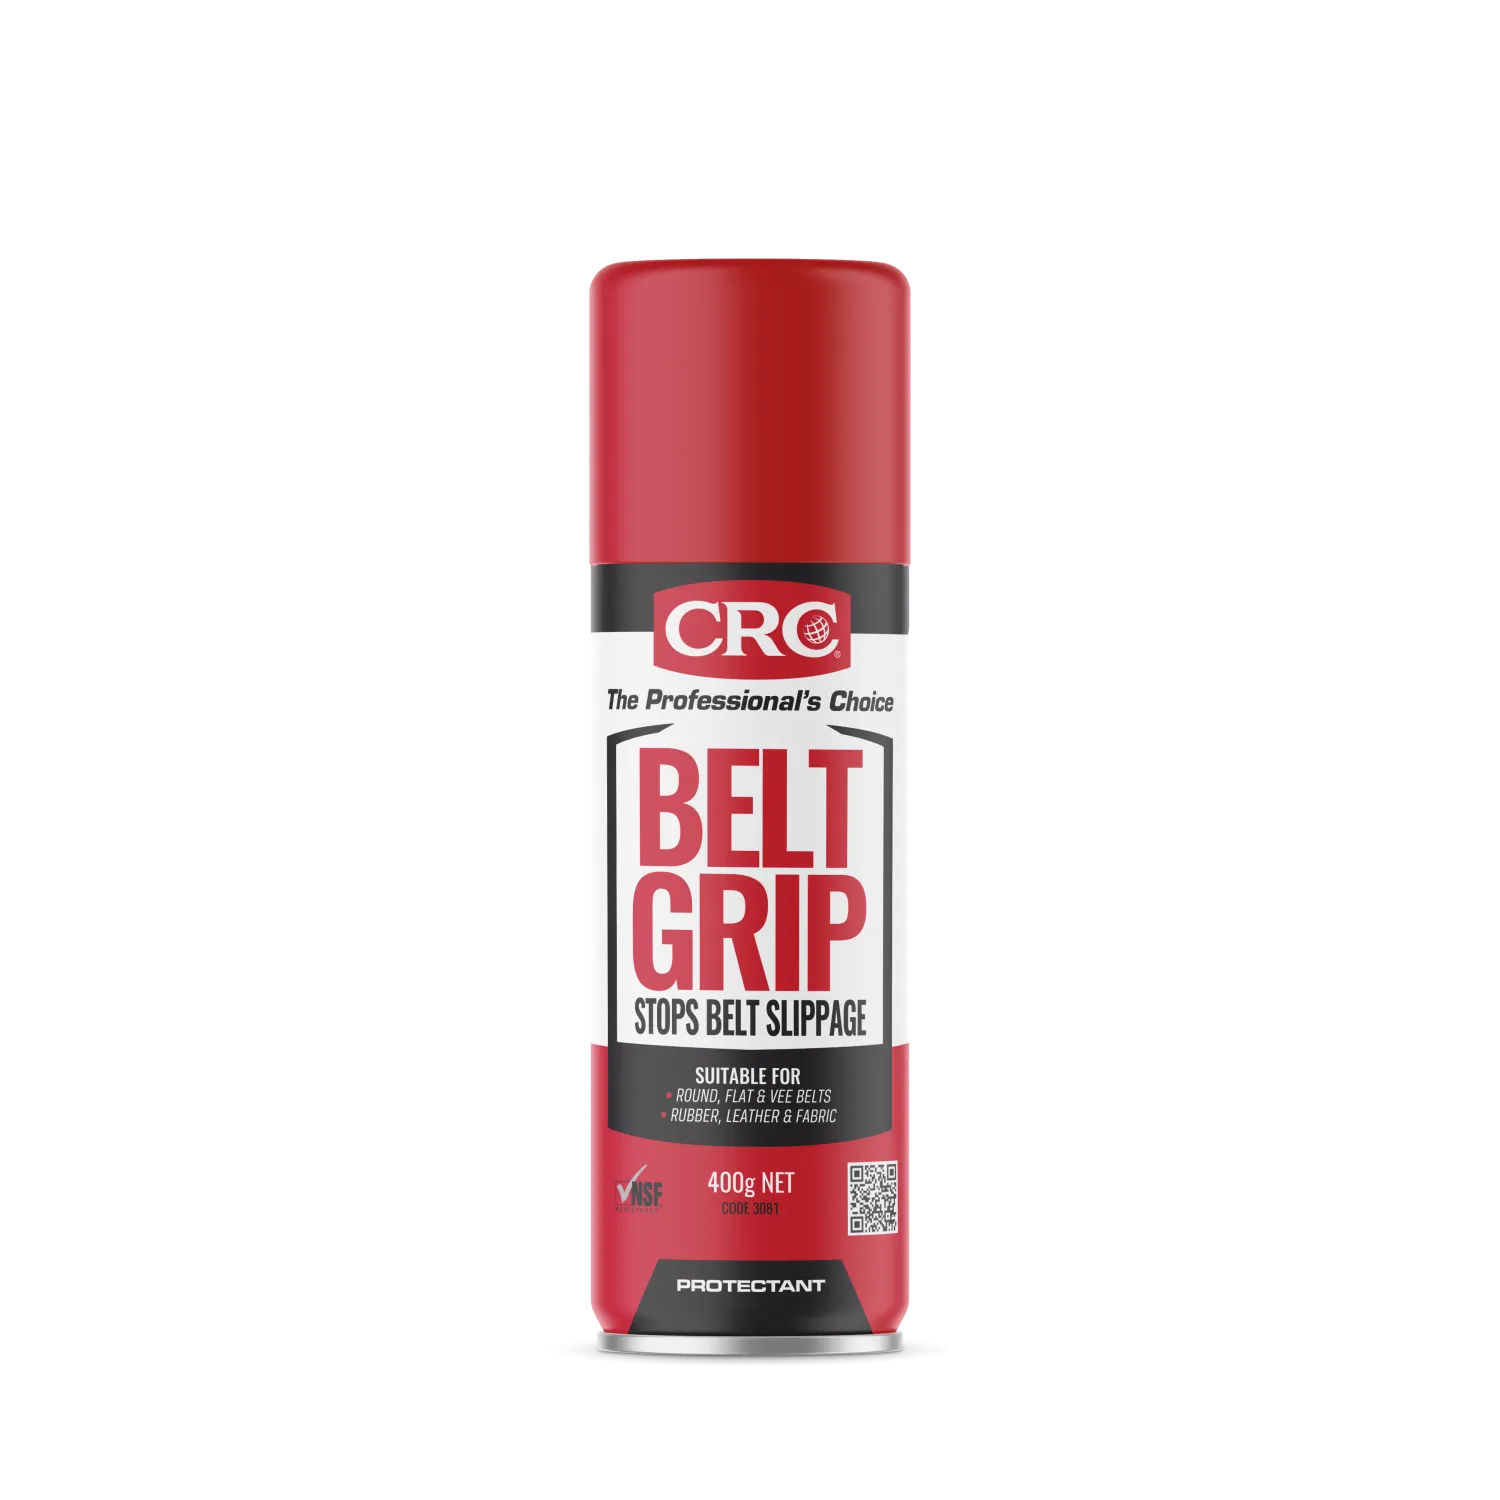 CRC Belt Grip 400g | Product Code : 3081 - South East Clearance Centre